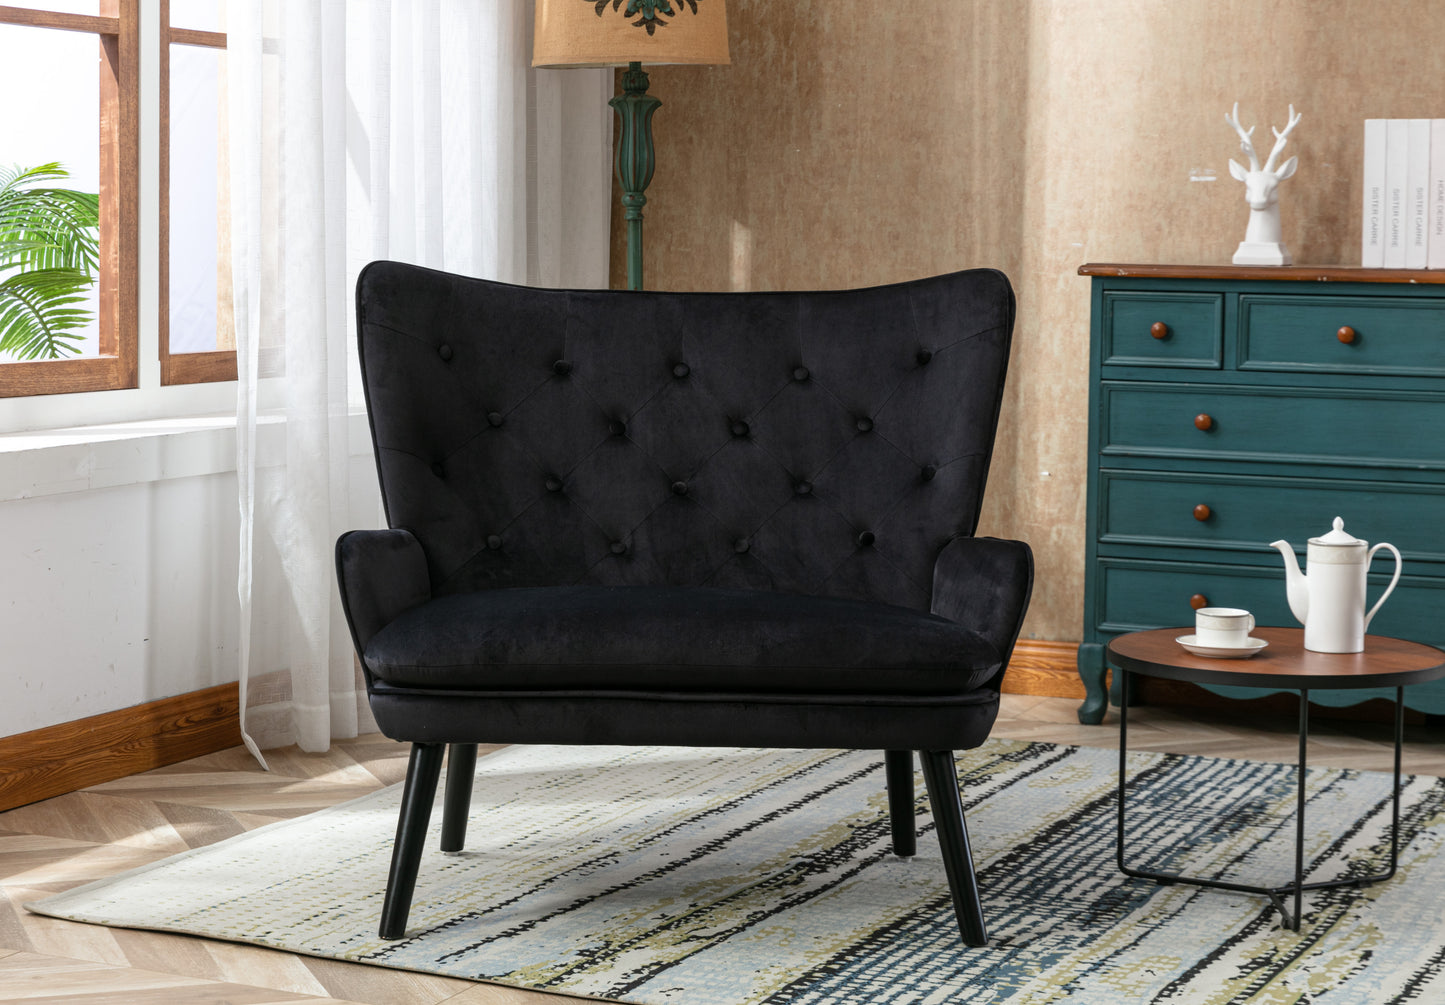 High Back Accent Chair .Comfortable Loveseat Fabric Padded Seat .Modern High Back Arm-sofa